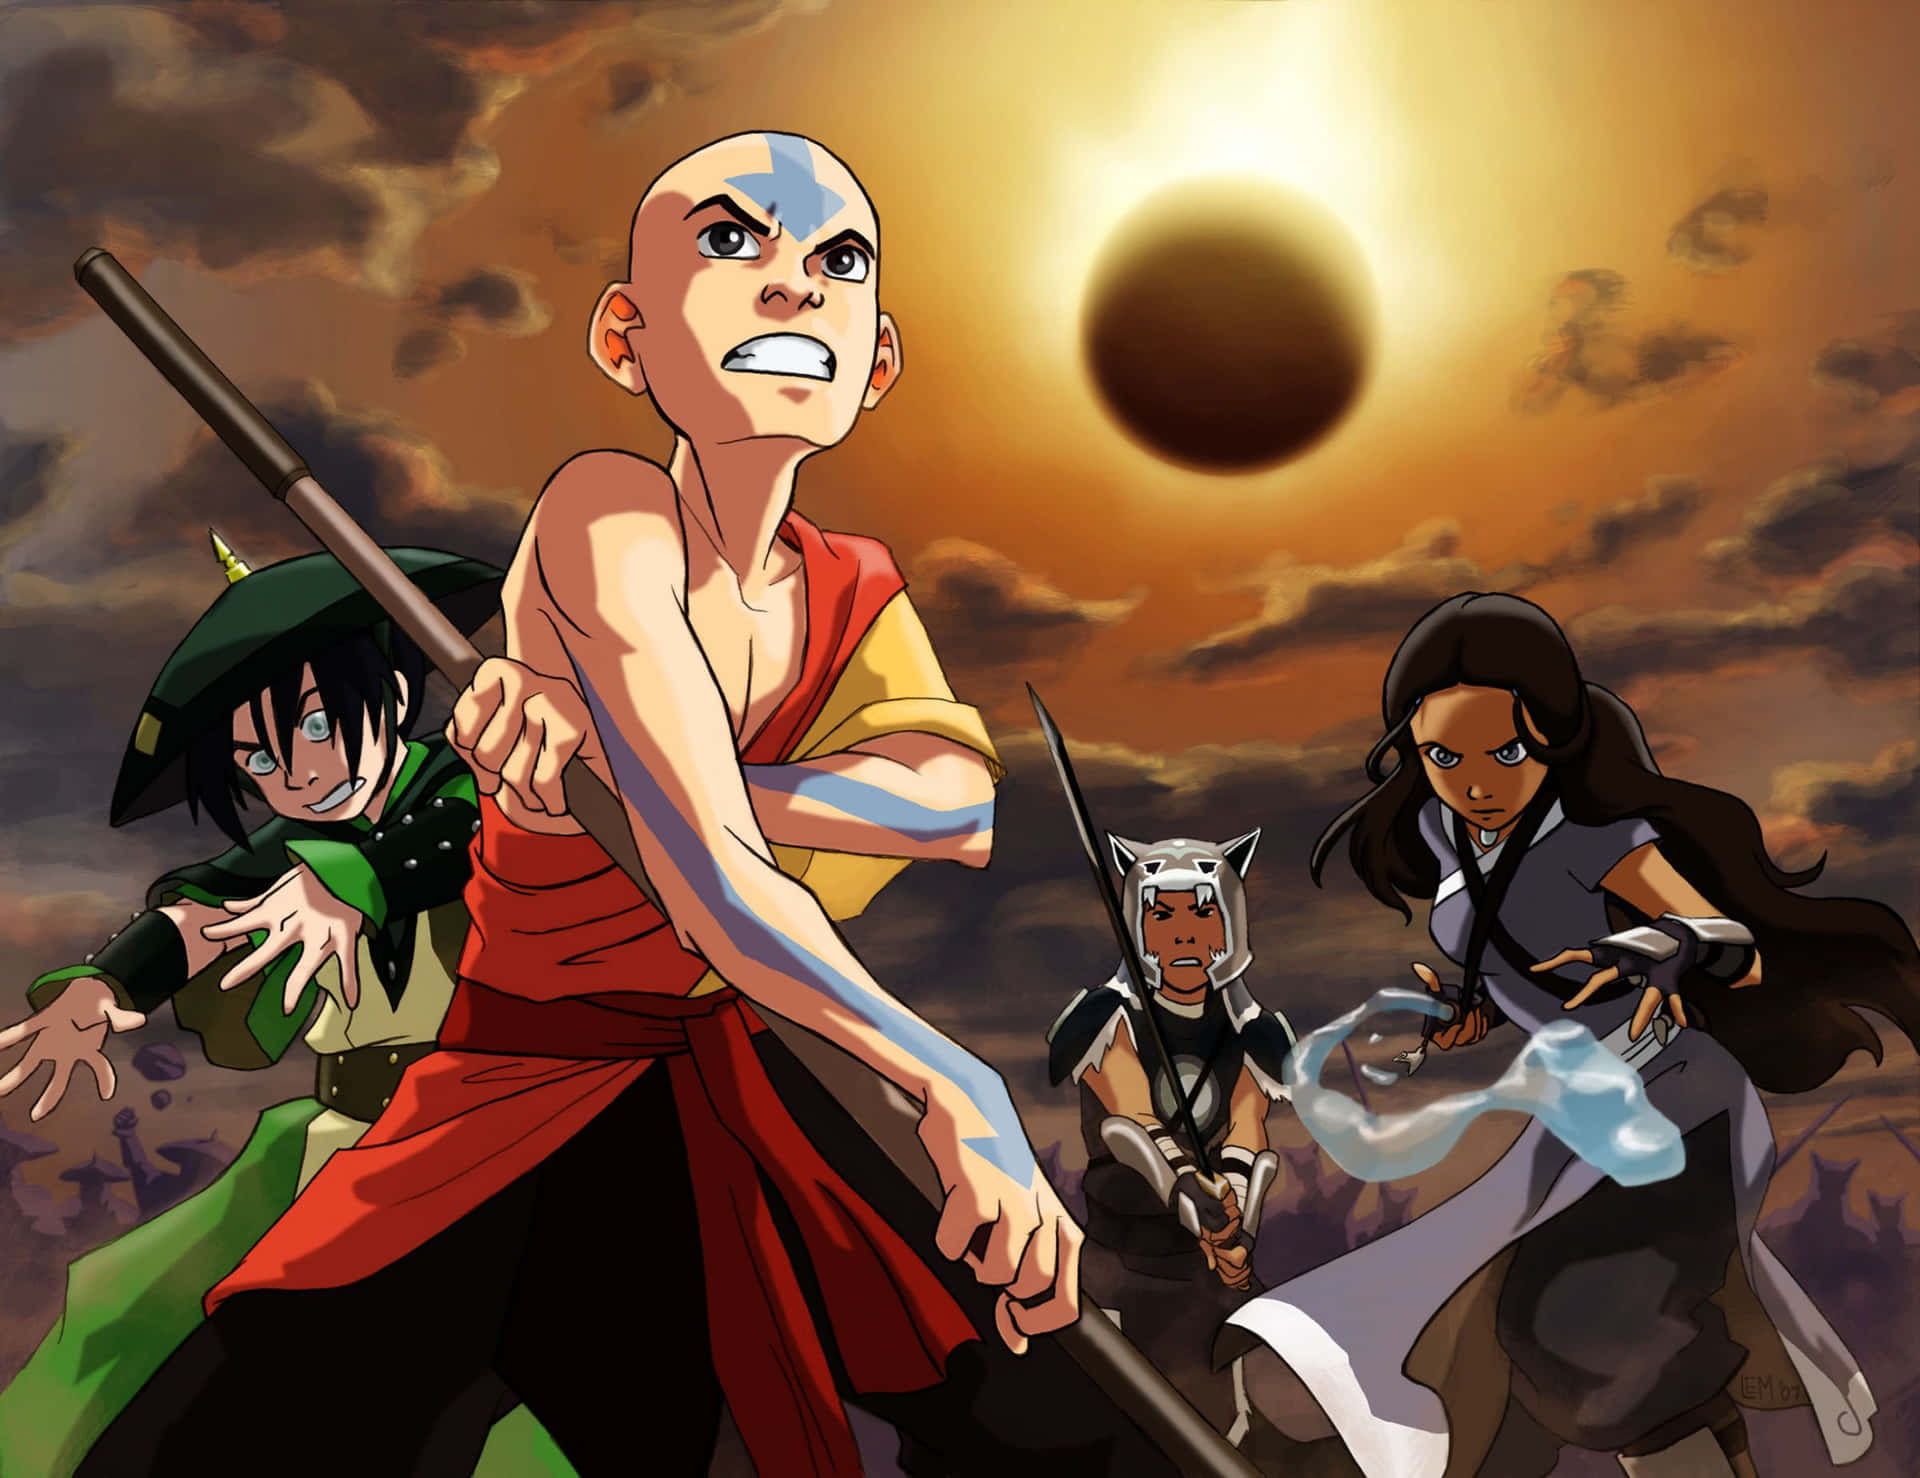 Avatar Aang with the Lights of Fire Nation